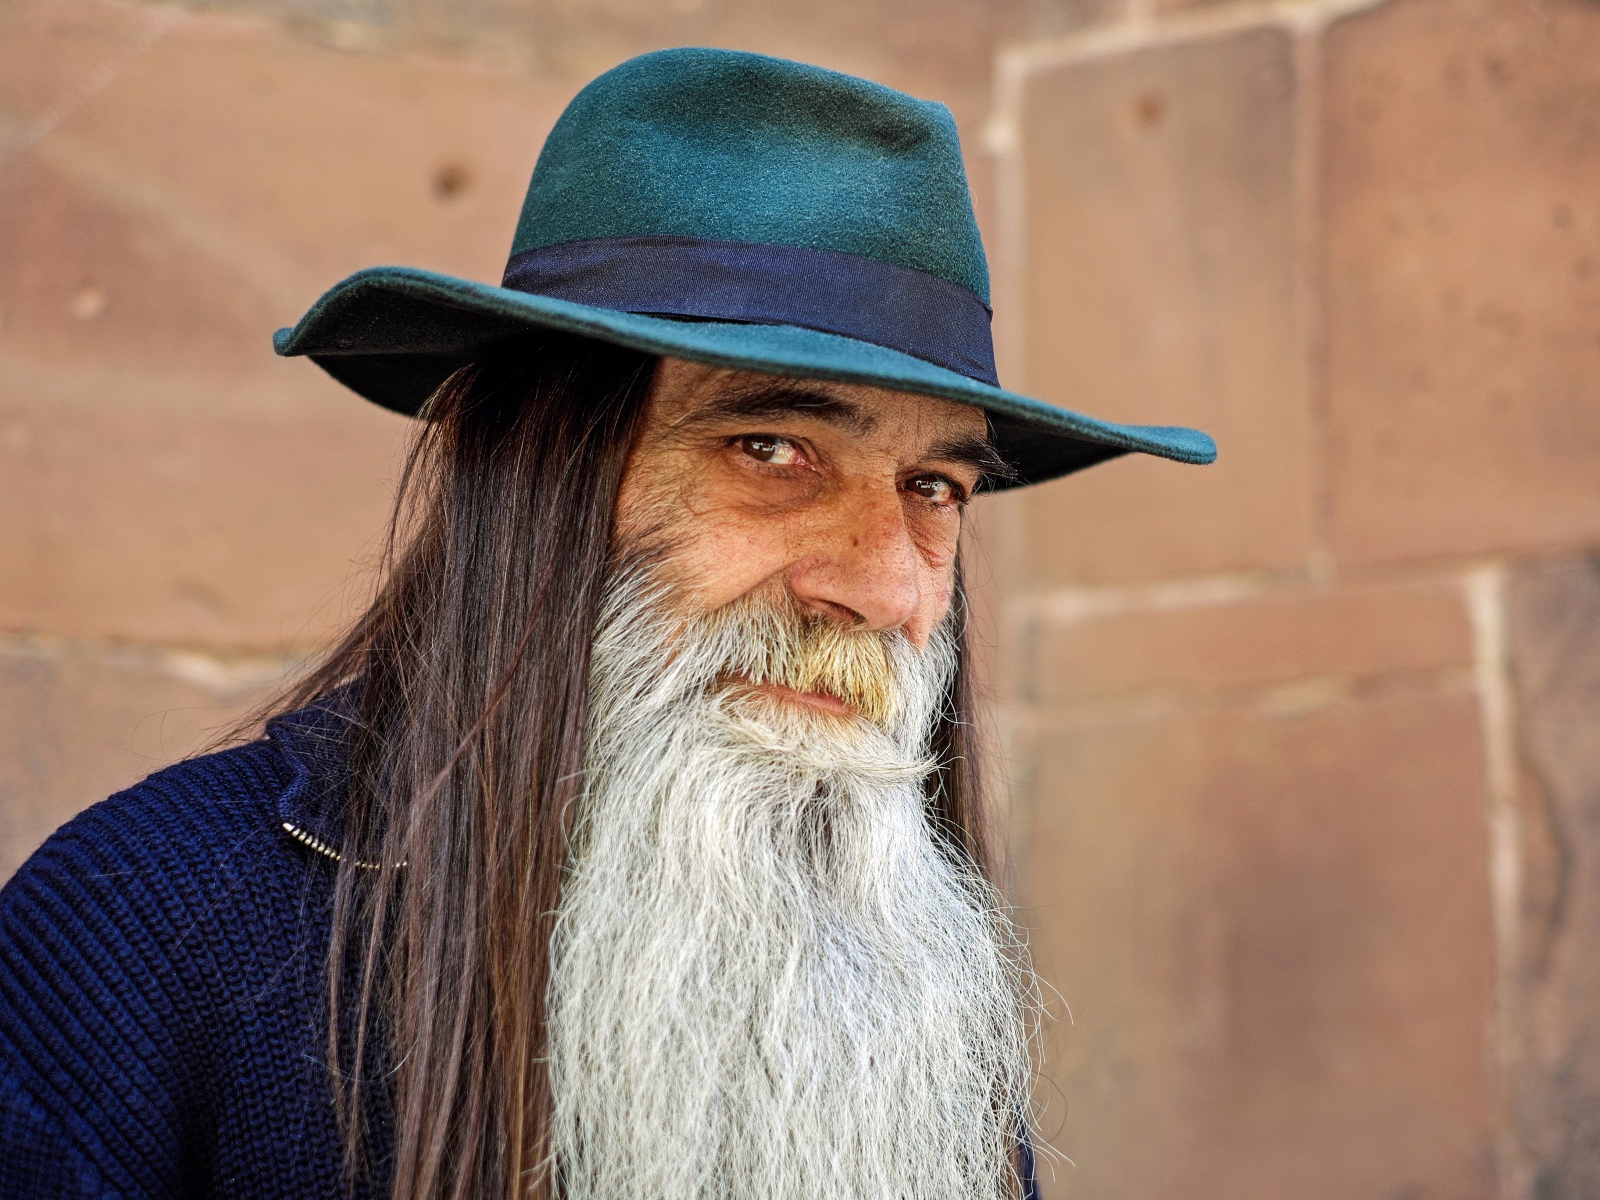 Elderly man with long hair wearing a hat